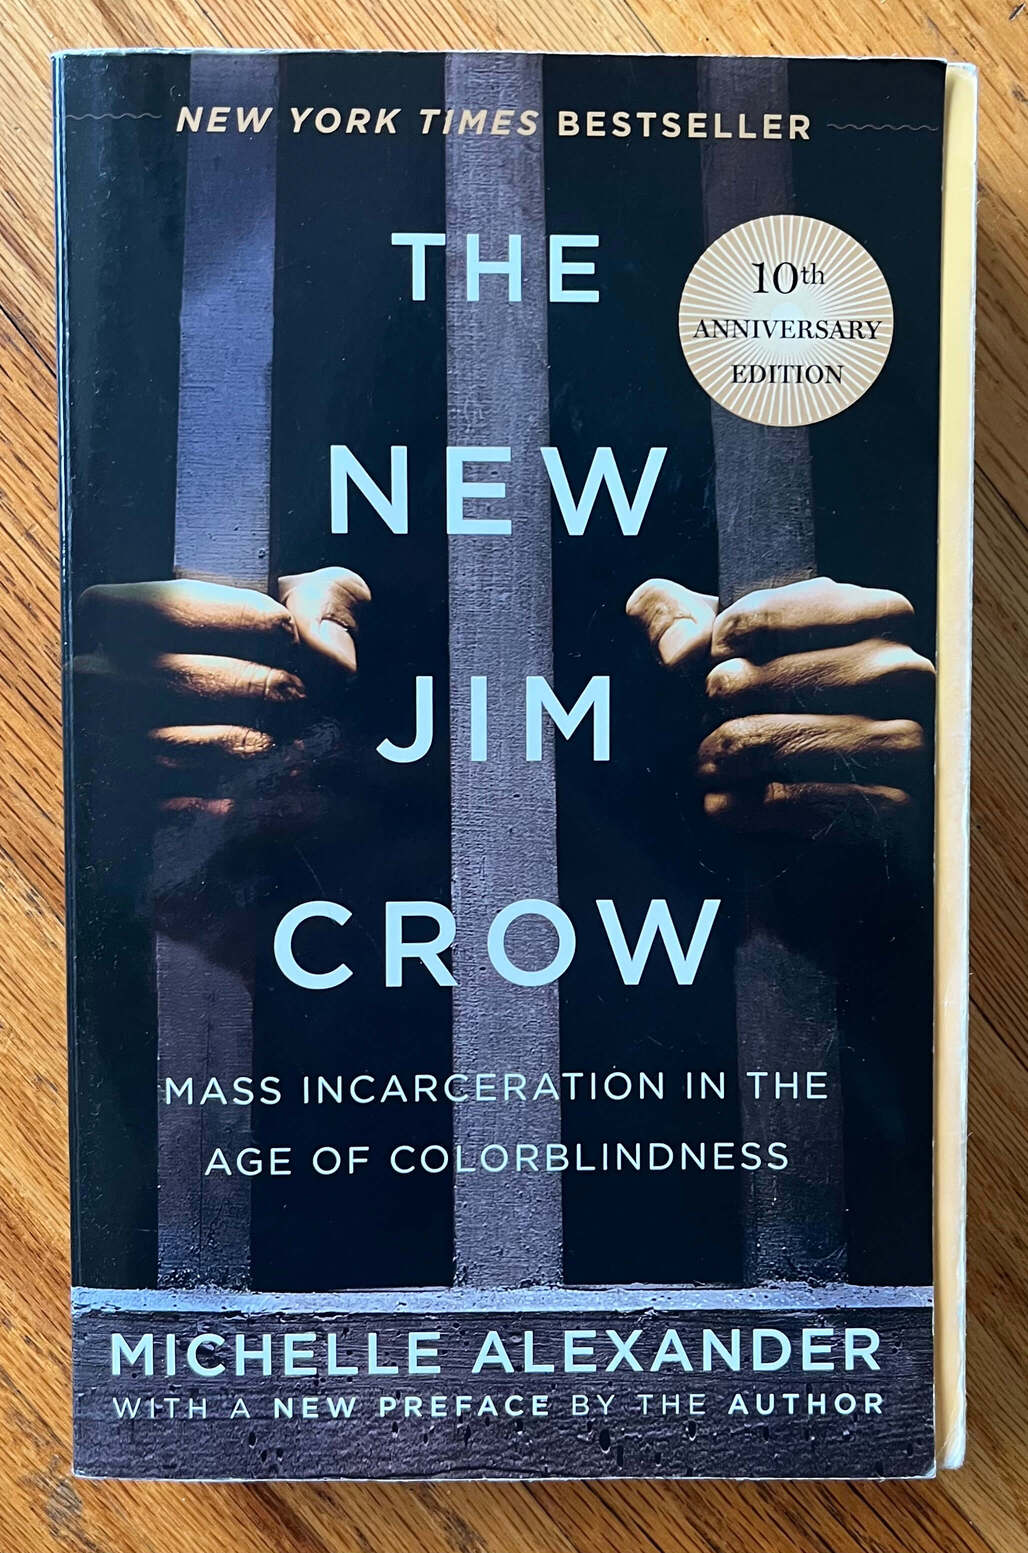 “The New Jim Crow: Mass Incarceration in the Age of Colorblindness” by Michelle Alexander. With a new preface by the author.